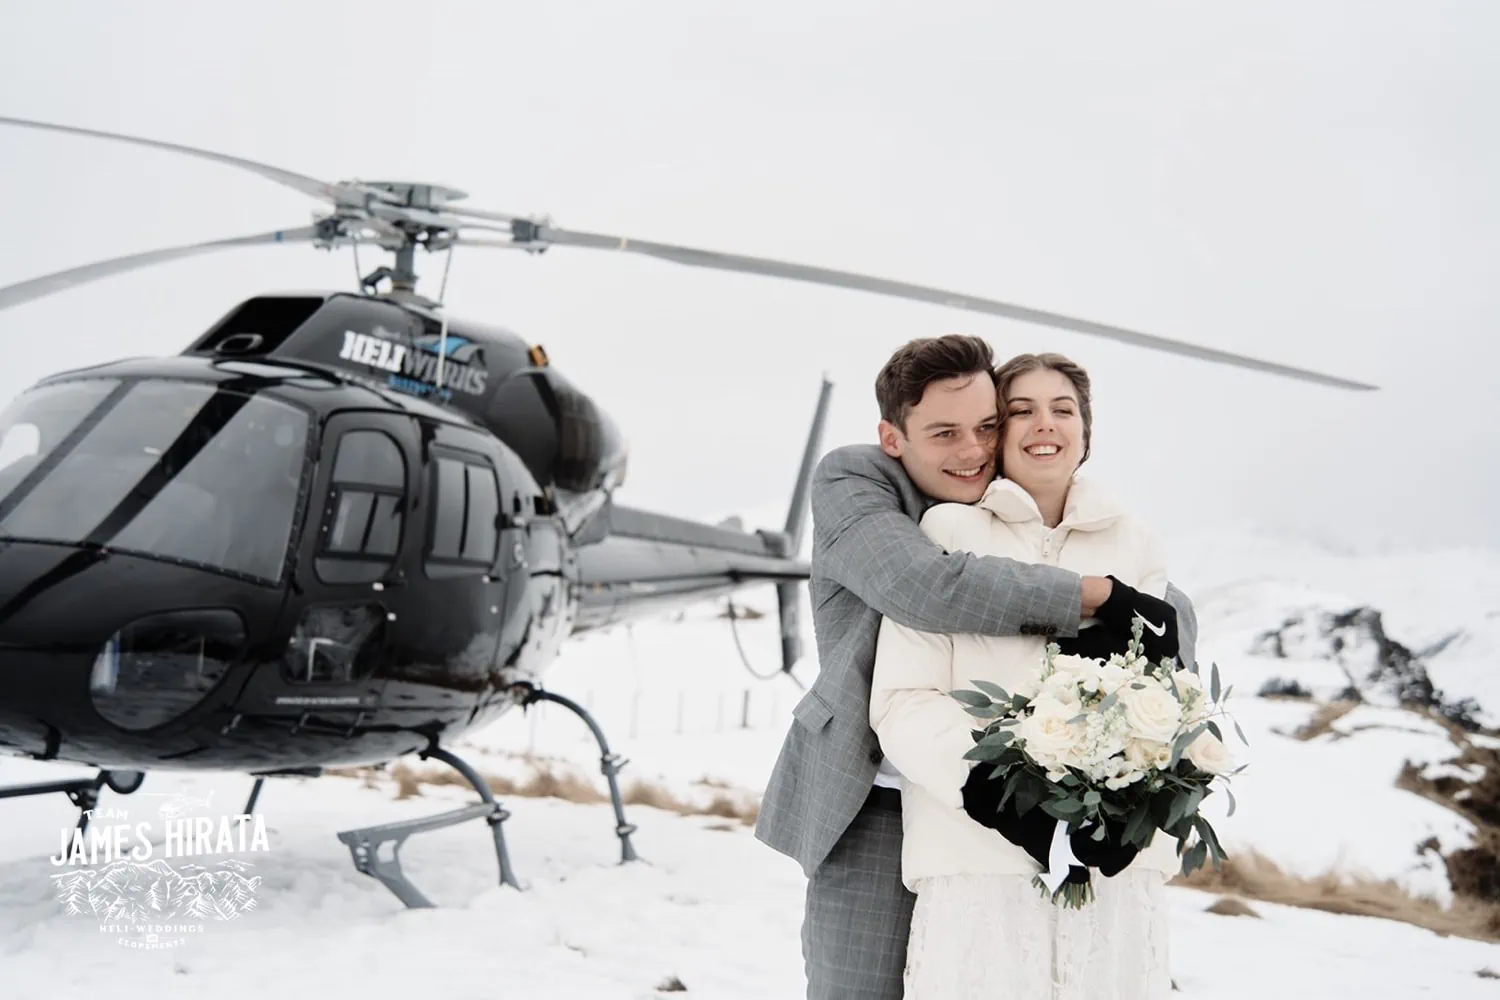 A Regan and Jake embracing in front of a helicopter during their Queenstown elopement wedding.